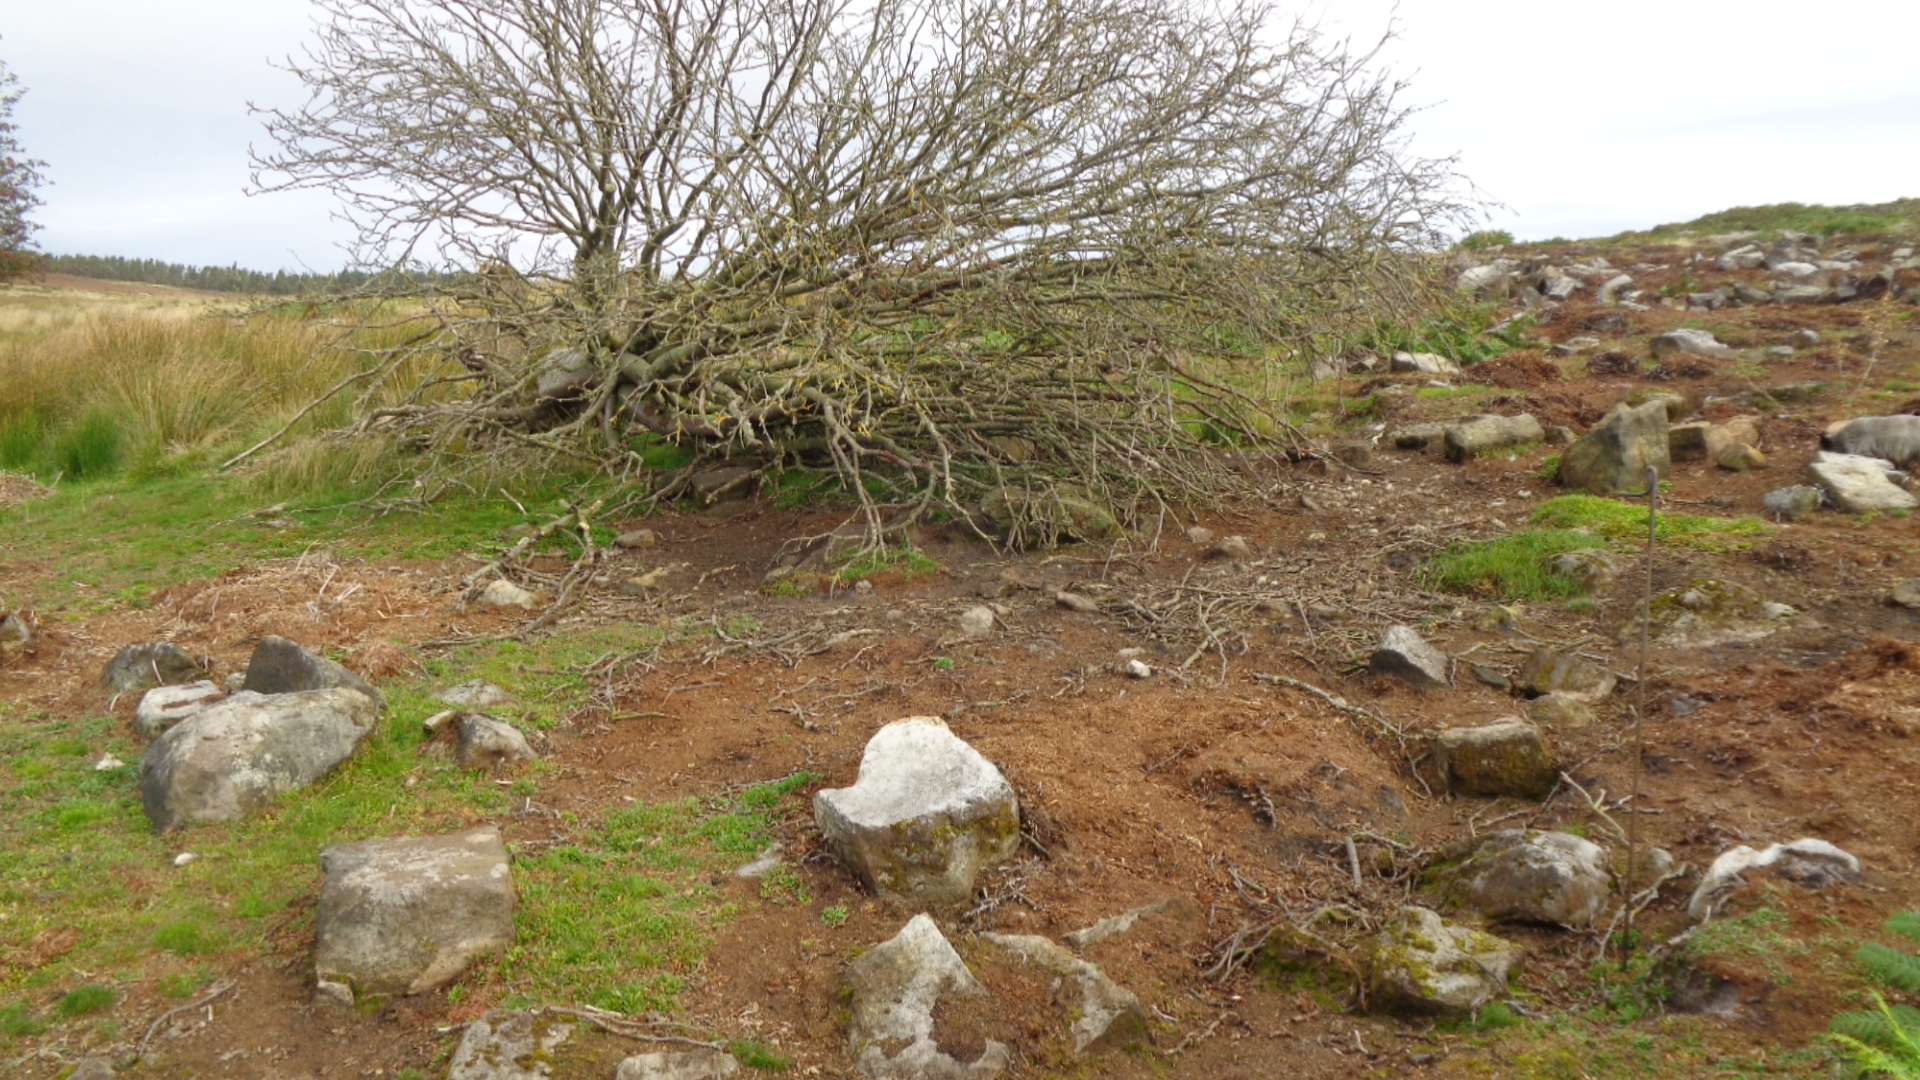 Recent soil loss has exposed roots and buildings at Sheepwash